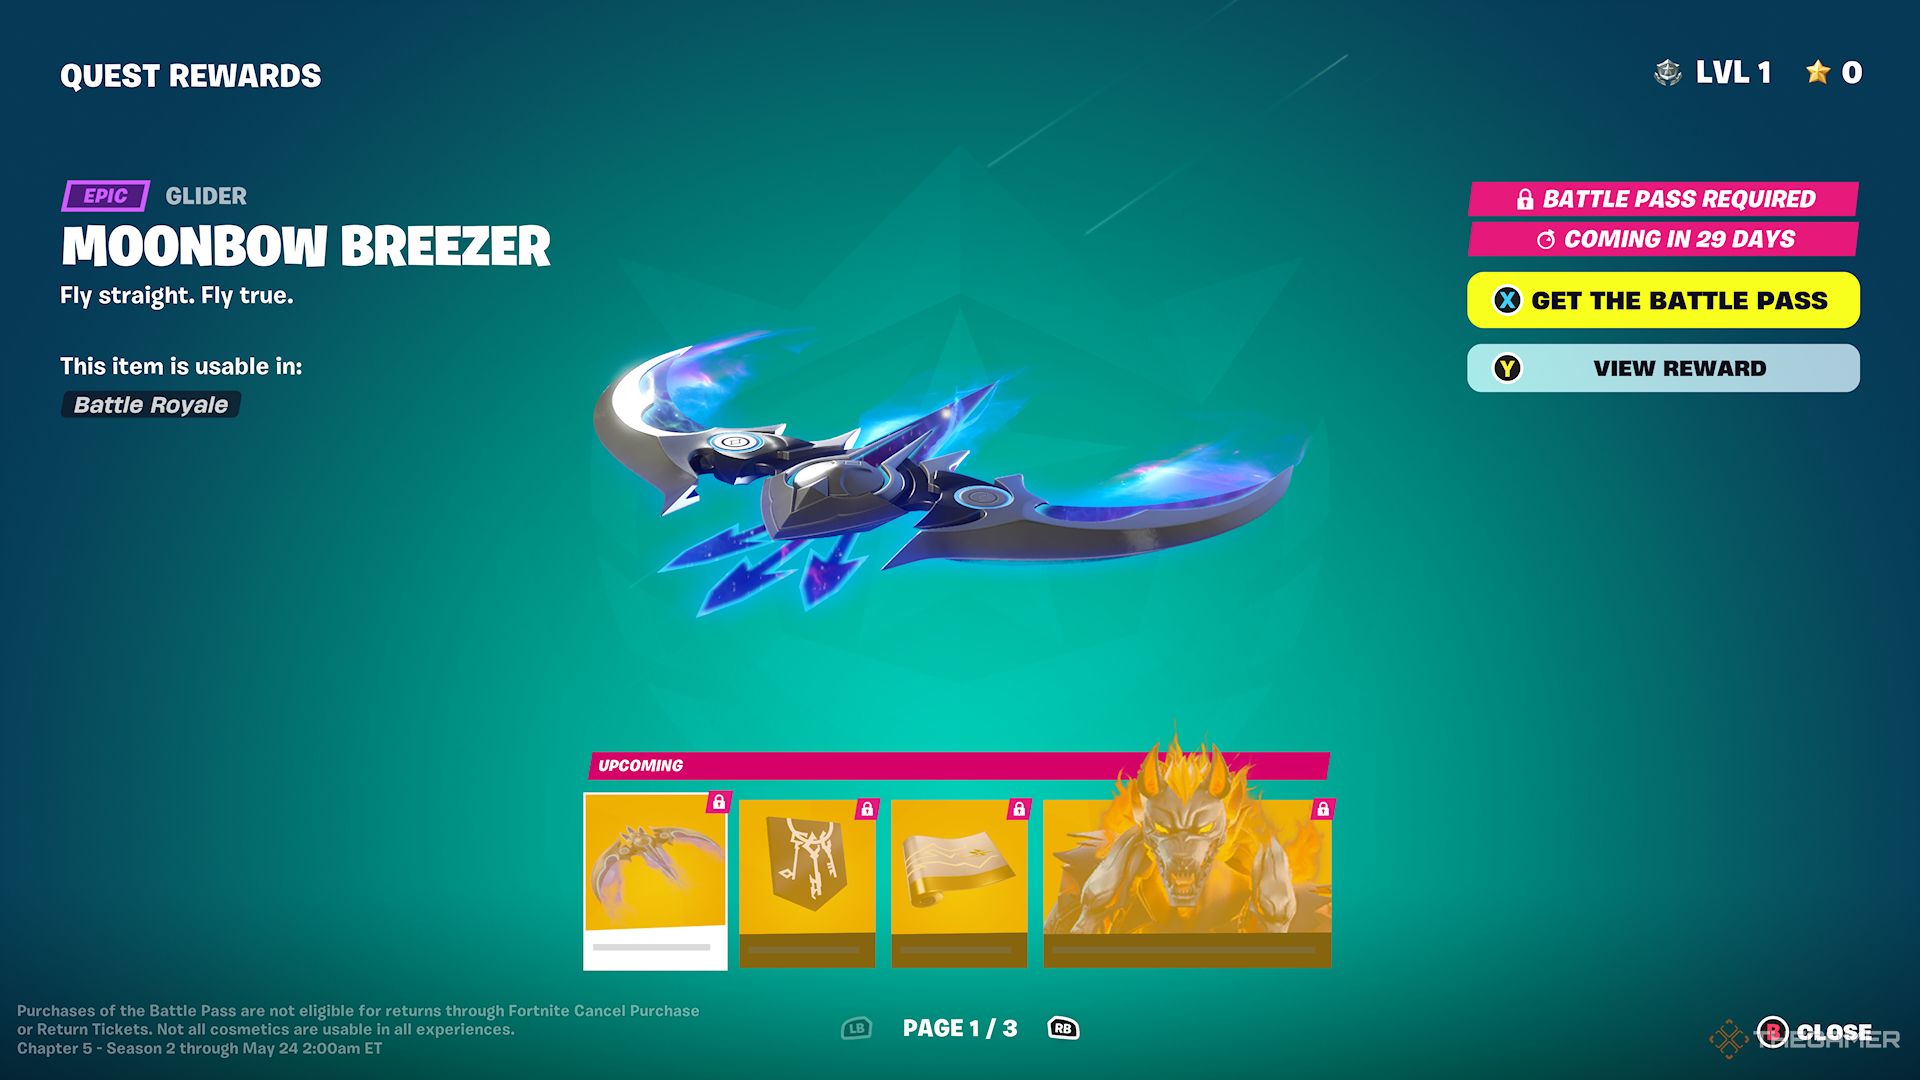 Screenshot of one of the Quest Rewards, the Moonbow Breezer, in Fortnite Chapter 5 Season 2.